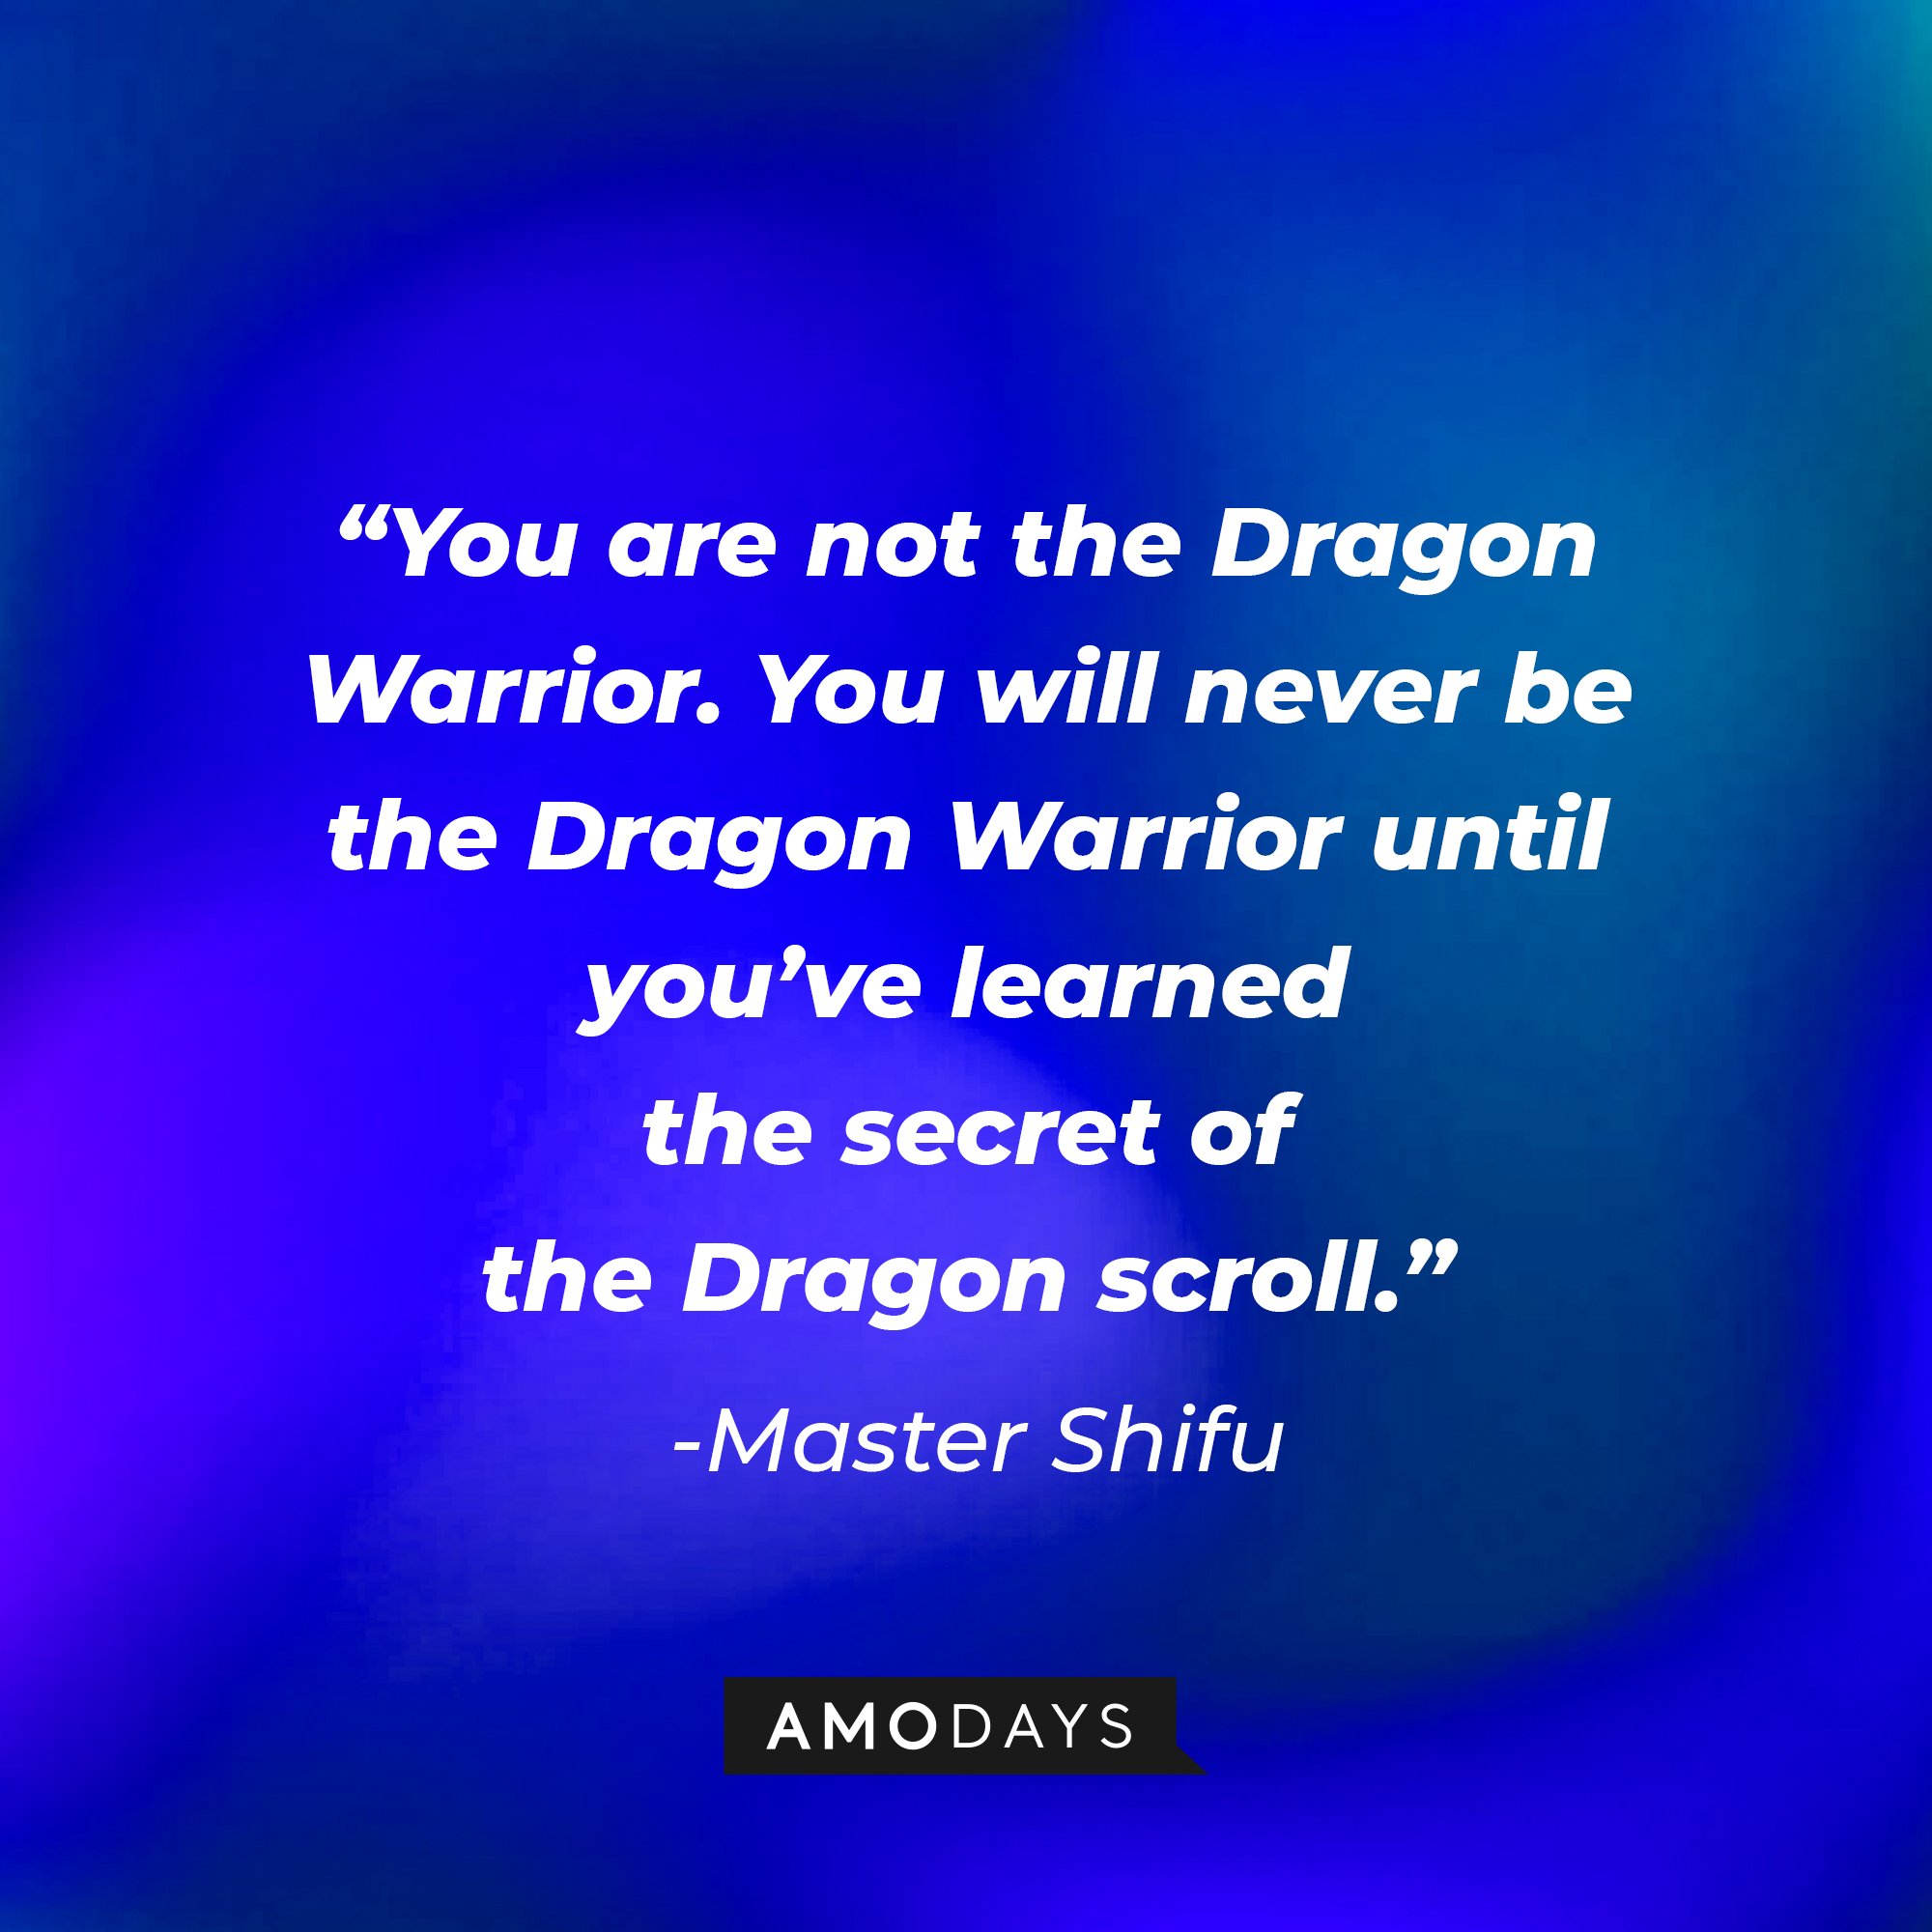 Master Shifu's quote: “You are not the Dragon Warrior. You will never be the Dragon Warrior until you’ve learned the secret of the Dragon scroll.” | Image: AmoDays